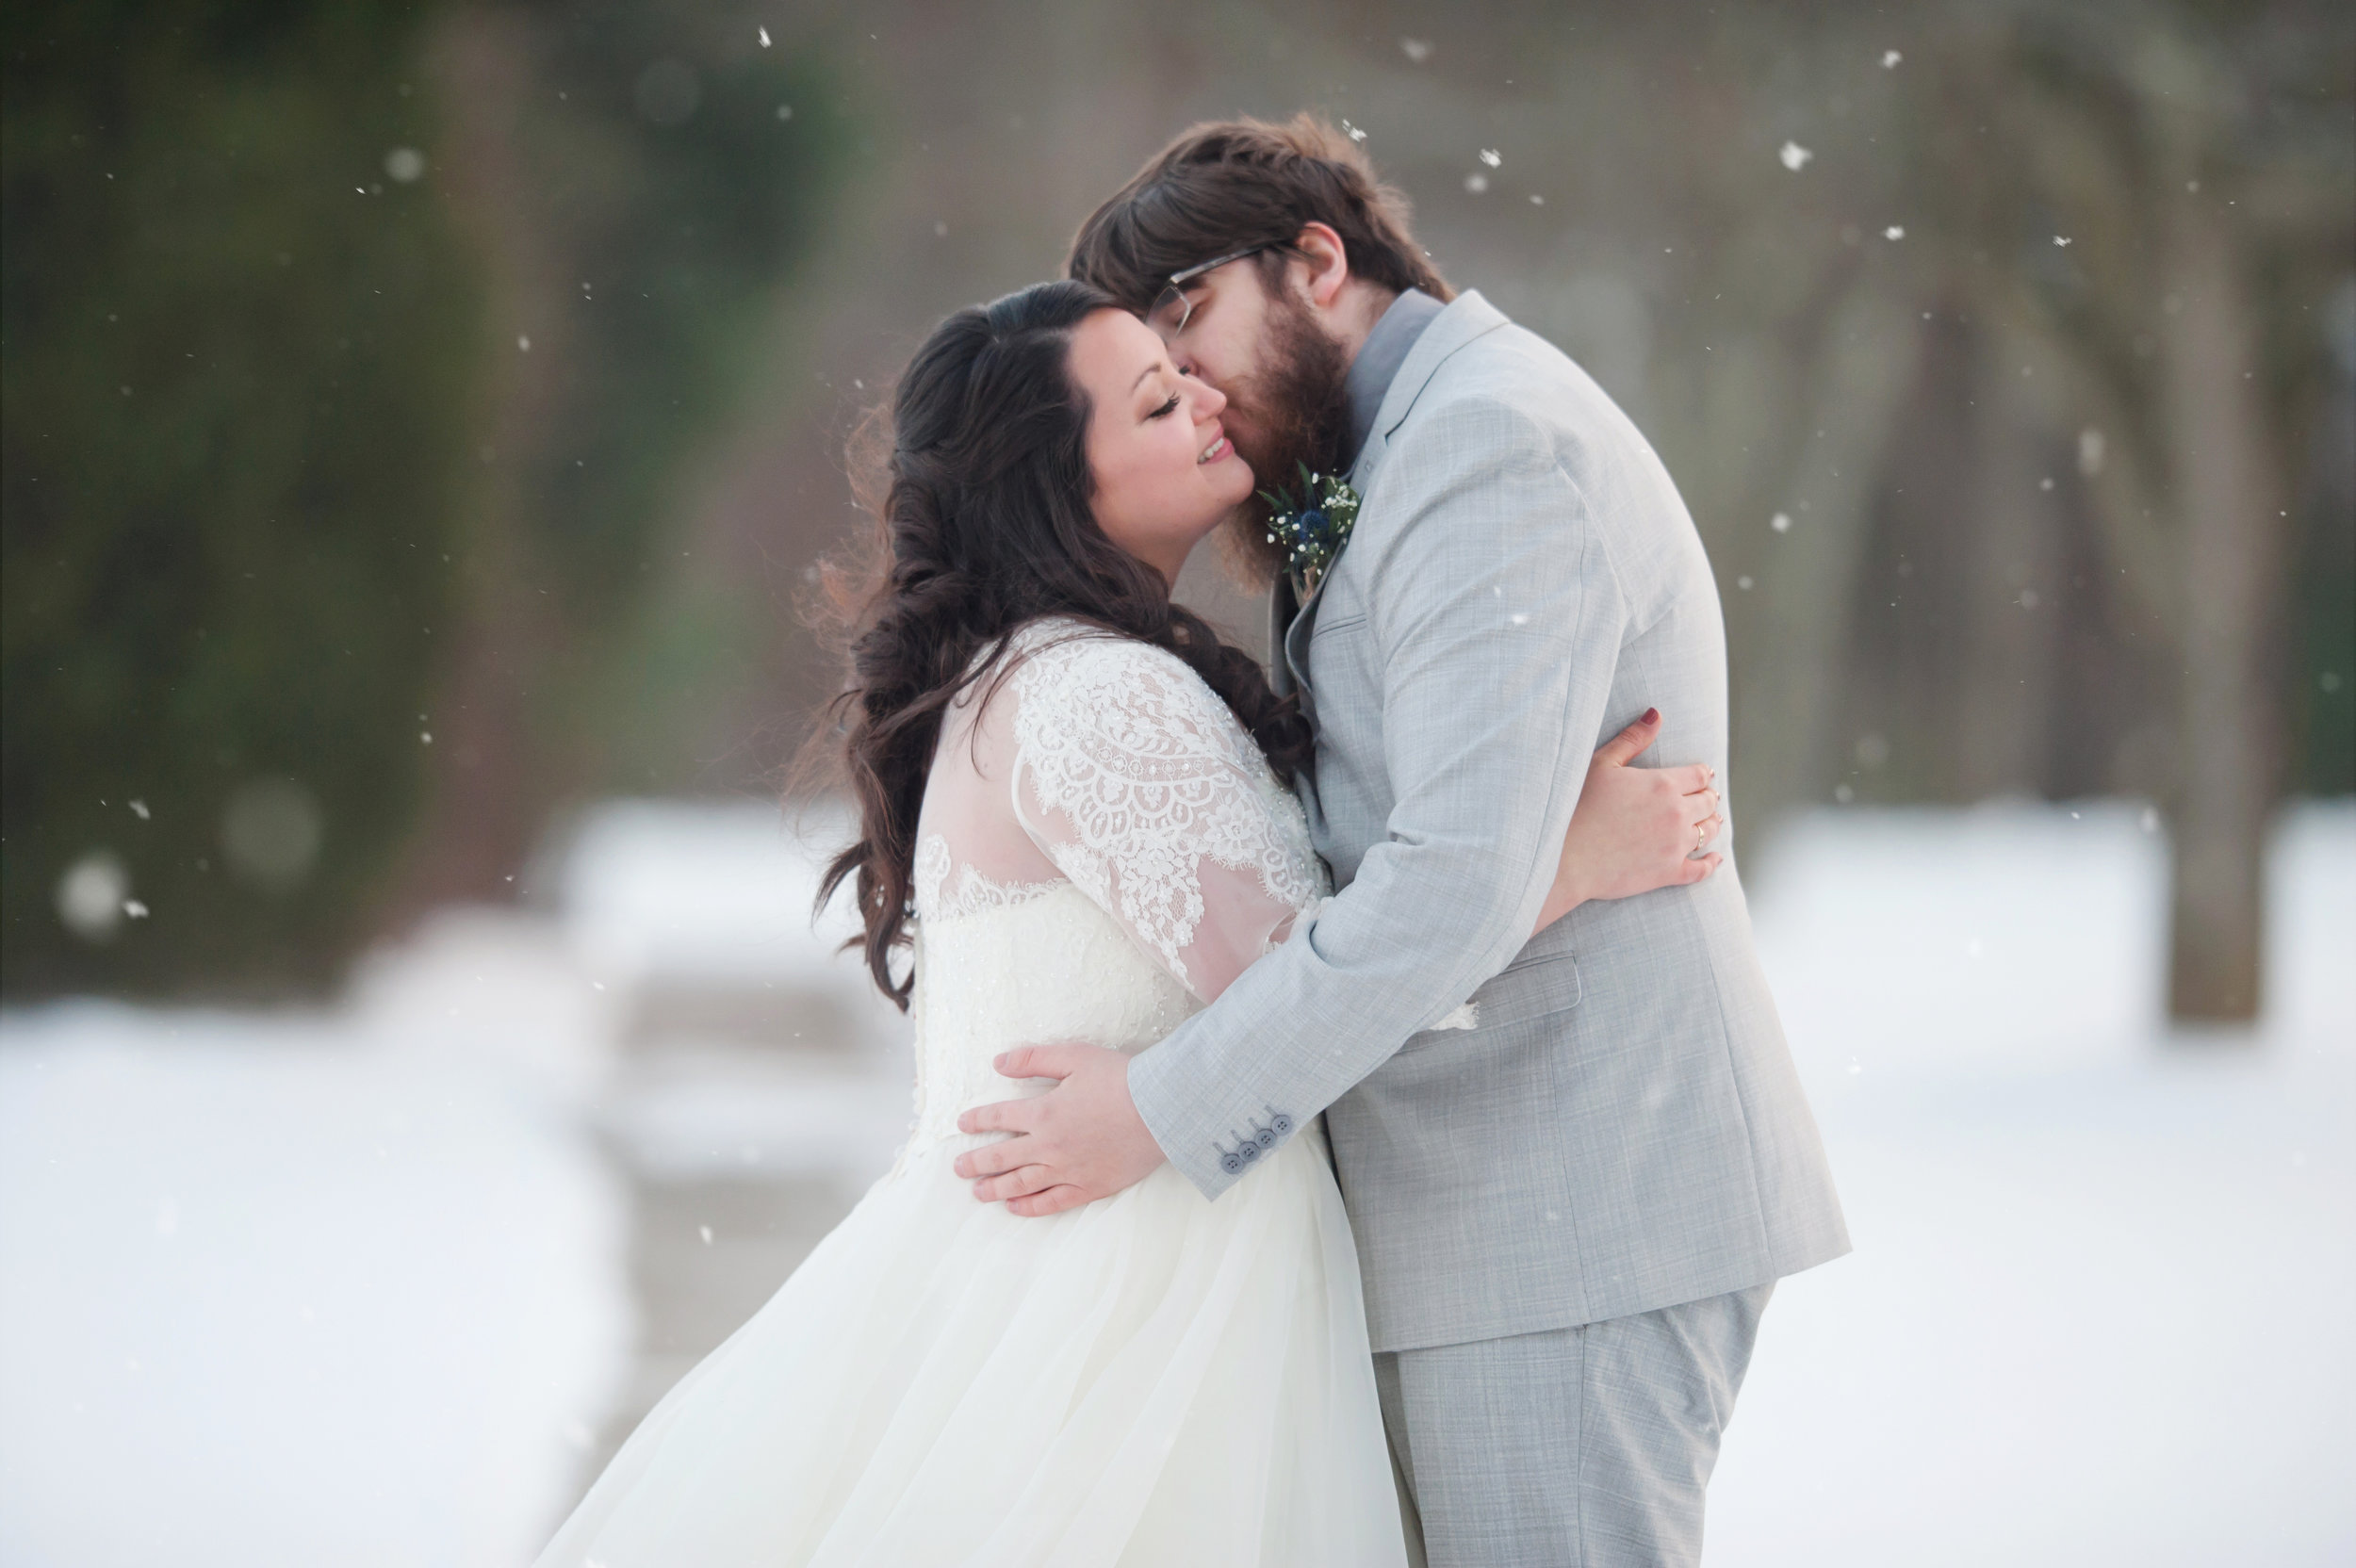  This photo may not have been taken in 2018, but I can’t think of a better way to end the year than photographing Erik and Faith’s December 27th, New England winter wedding. Although Erik is from Norwood, Massachusetts, Faith is from Atlanta, Georgia, which made their Worcester, Massachusetts wedding feel like a destination wedding. Faith was so excited to have a white Christmas and a white wedding, she and Erik braved six degree temperatures for their snowy wedding portraits! Needless to say, it was well worth it – so dreamy! 